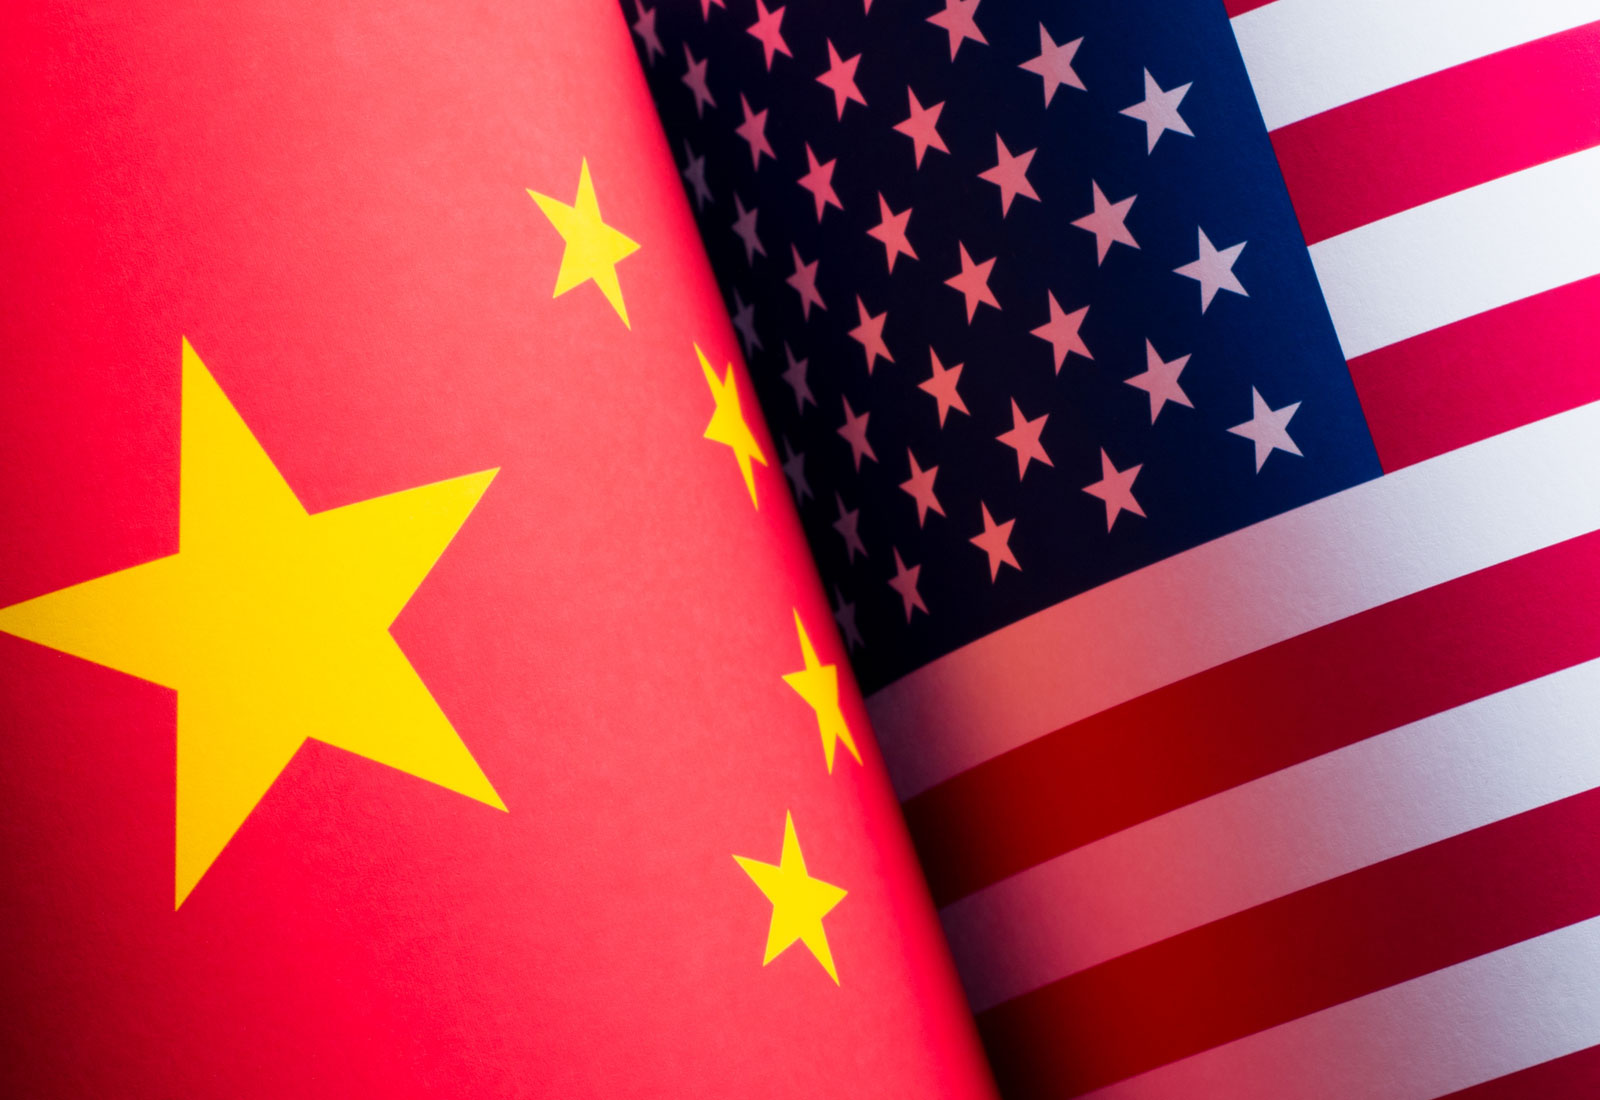 An American and Chines flag pressed against each other